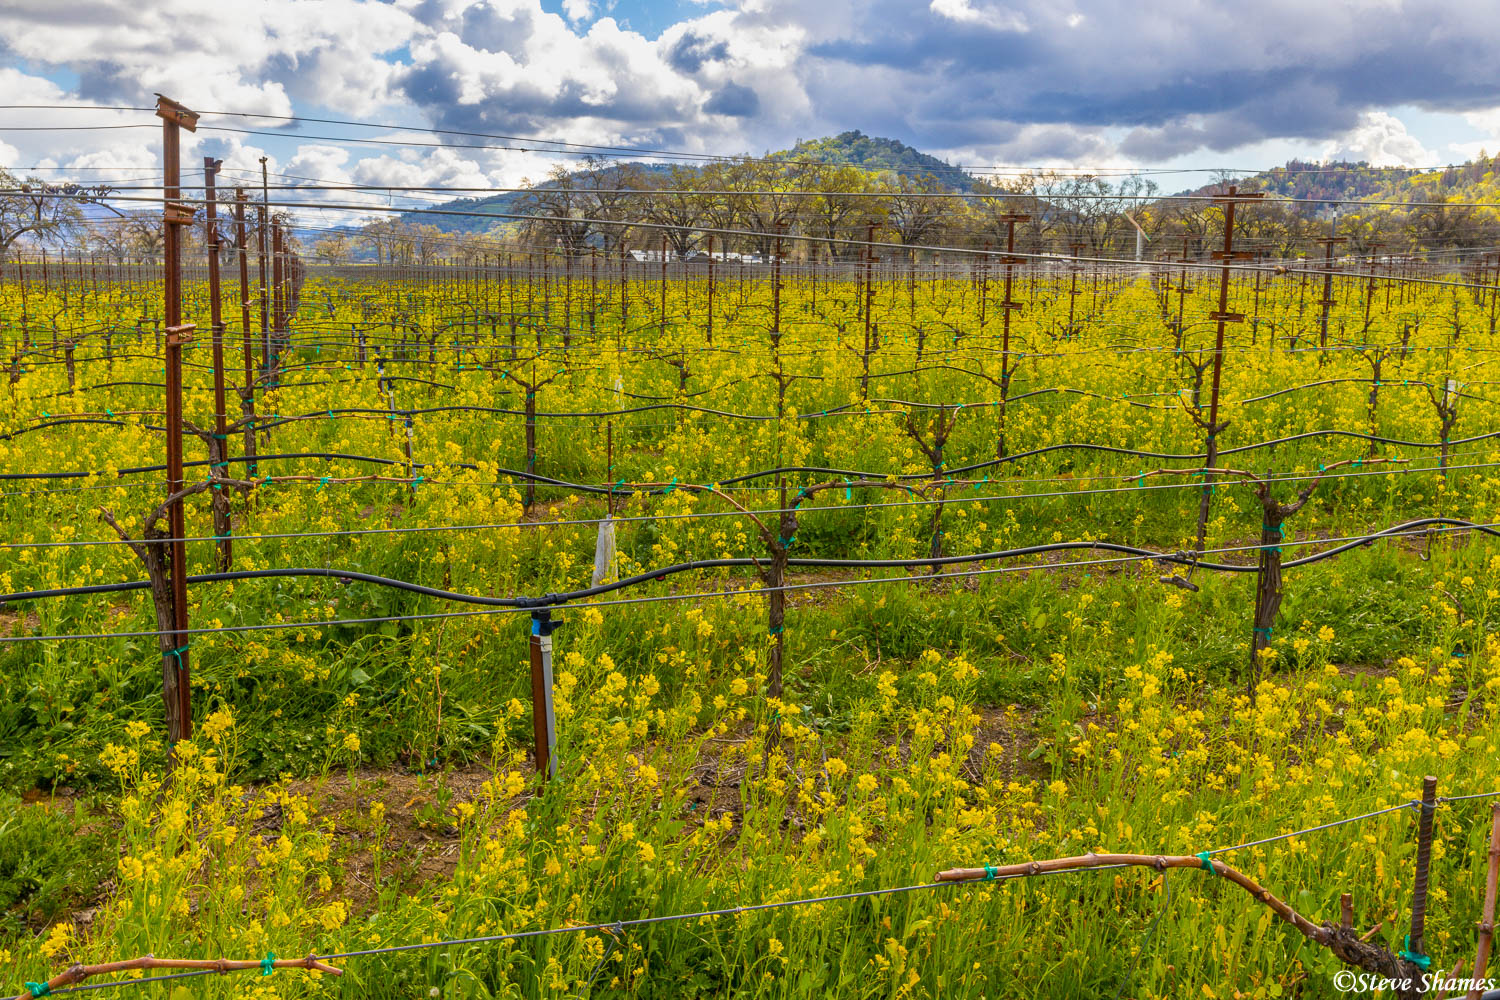 A colorful Pope Valley vineyard, overrun with wild mustard.